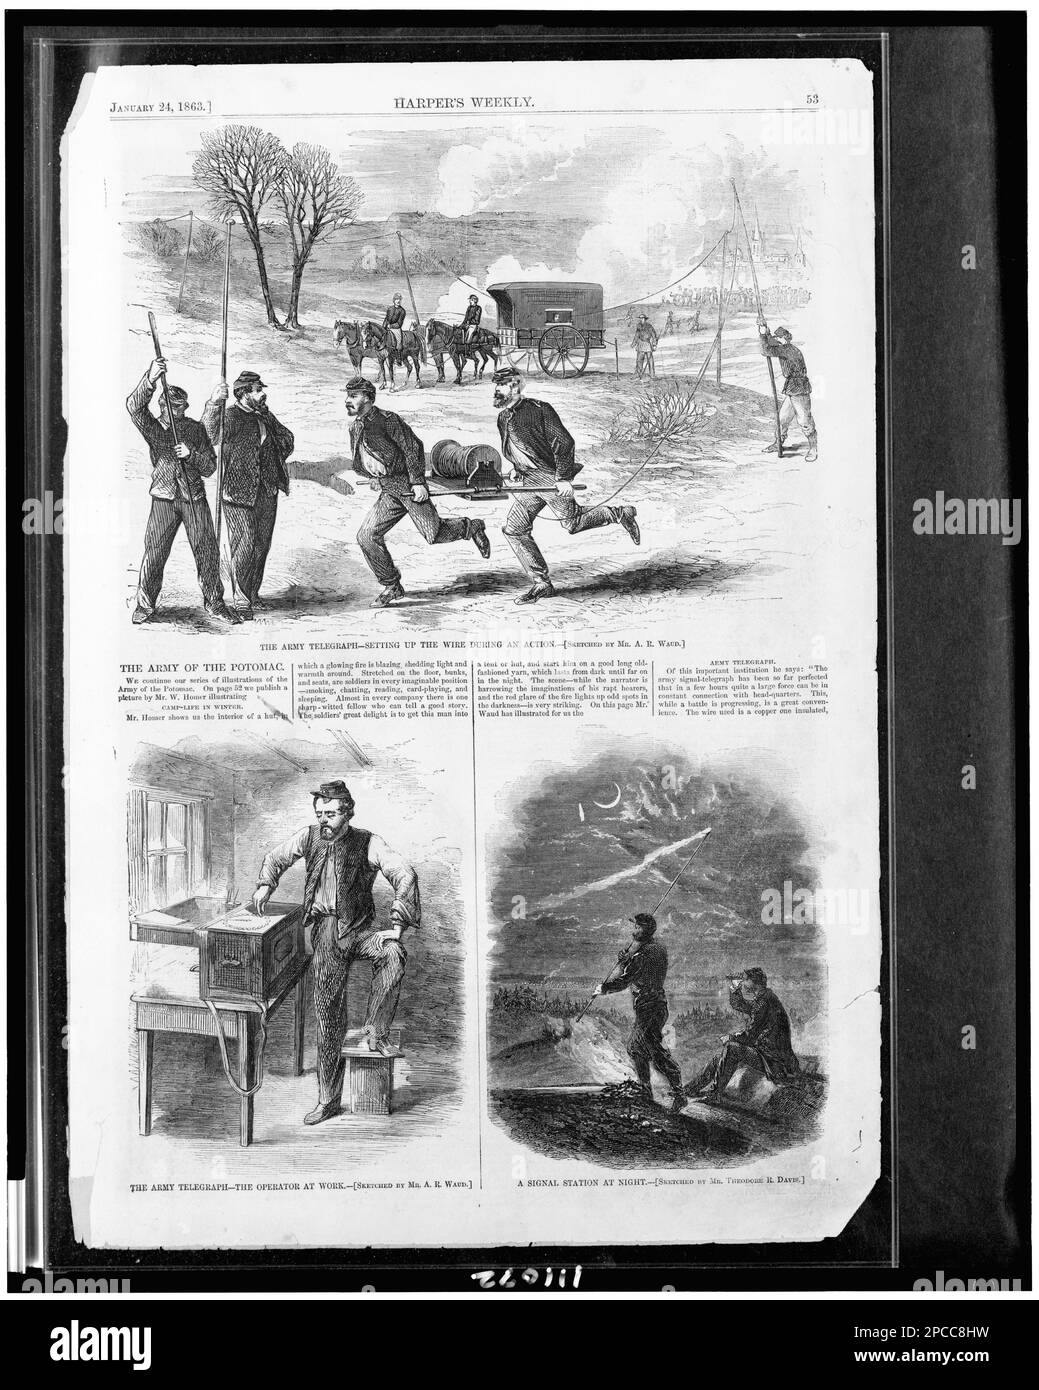 The Army telegraph - setting up the wire during an action The Army telegraph - the operator at work / / sketched by Mr. A.R. Waud. A signal station at night / sketched Mr. Theodore R. Davis.. 3 illustrations in: Harper's weekly, 1863 Jan. 24, p. 53. United States, History, Civil War, 1861-1865, Communications, Telegraph, United states, 1860-1870, Soldiers, Union, 1860-1870. Stock Photo